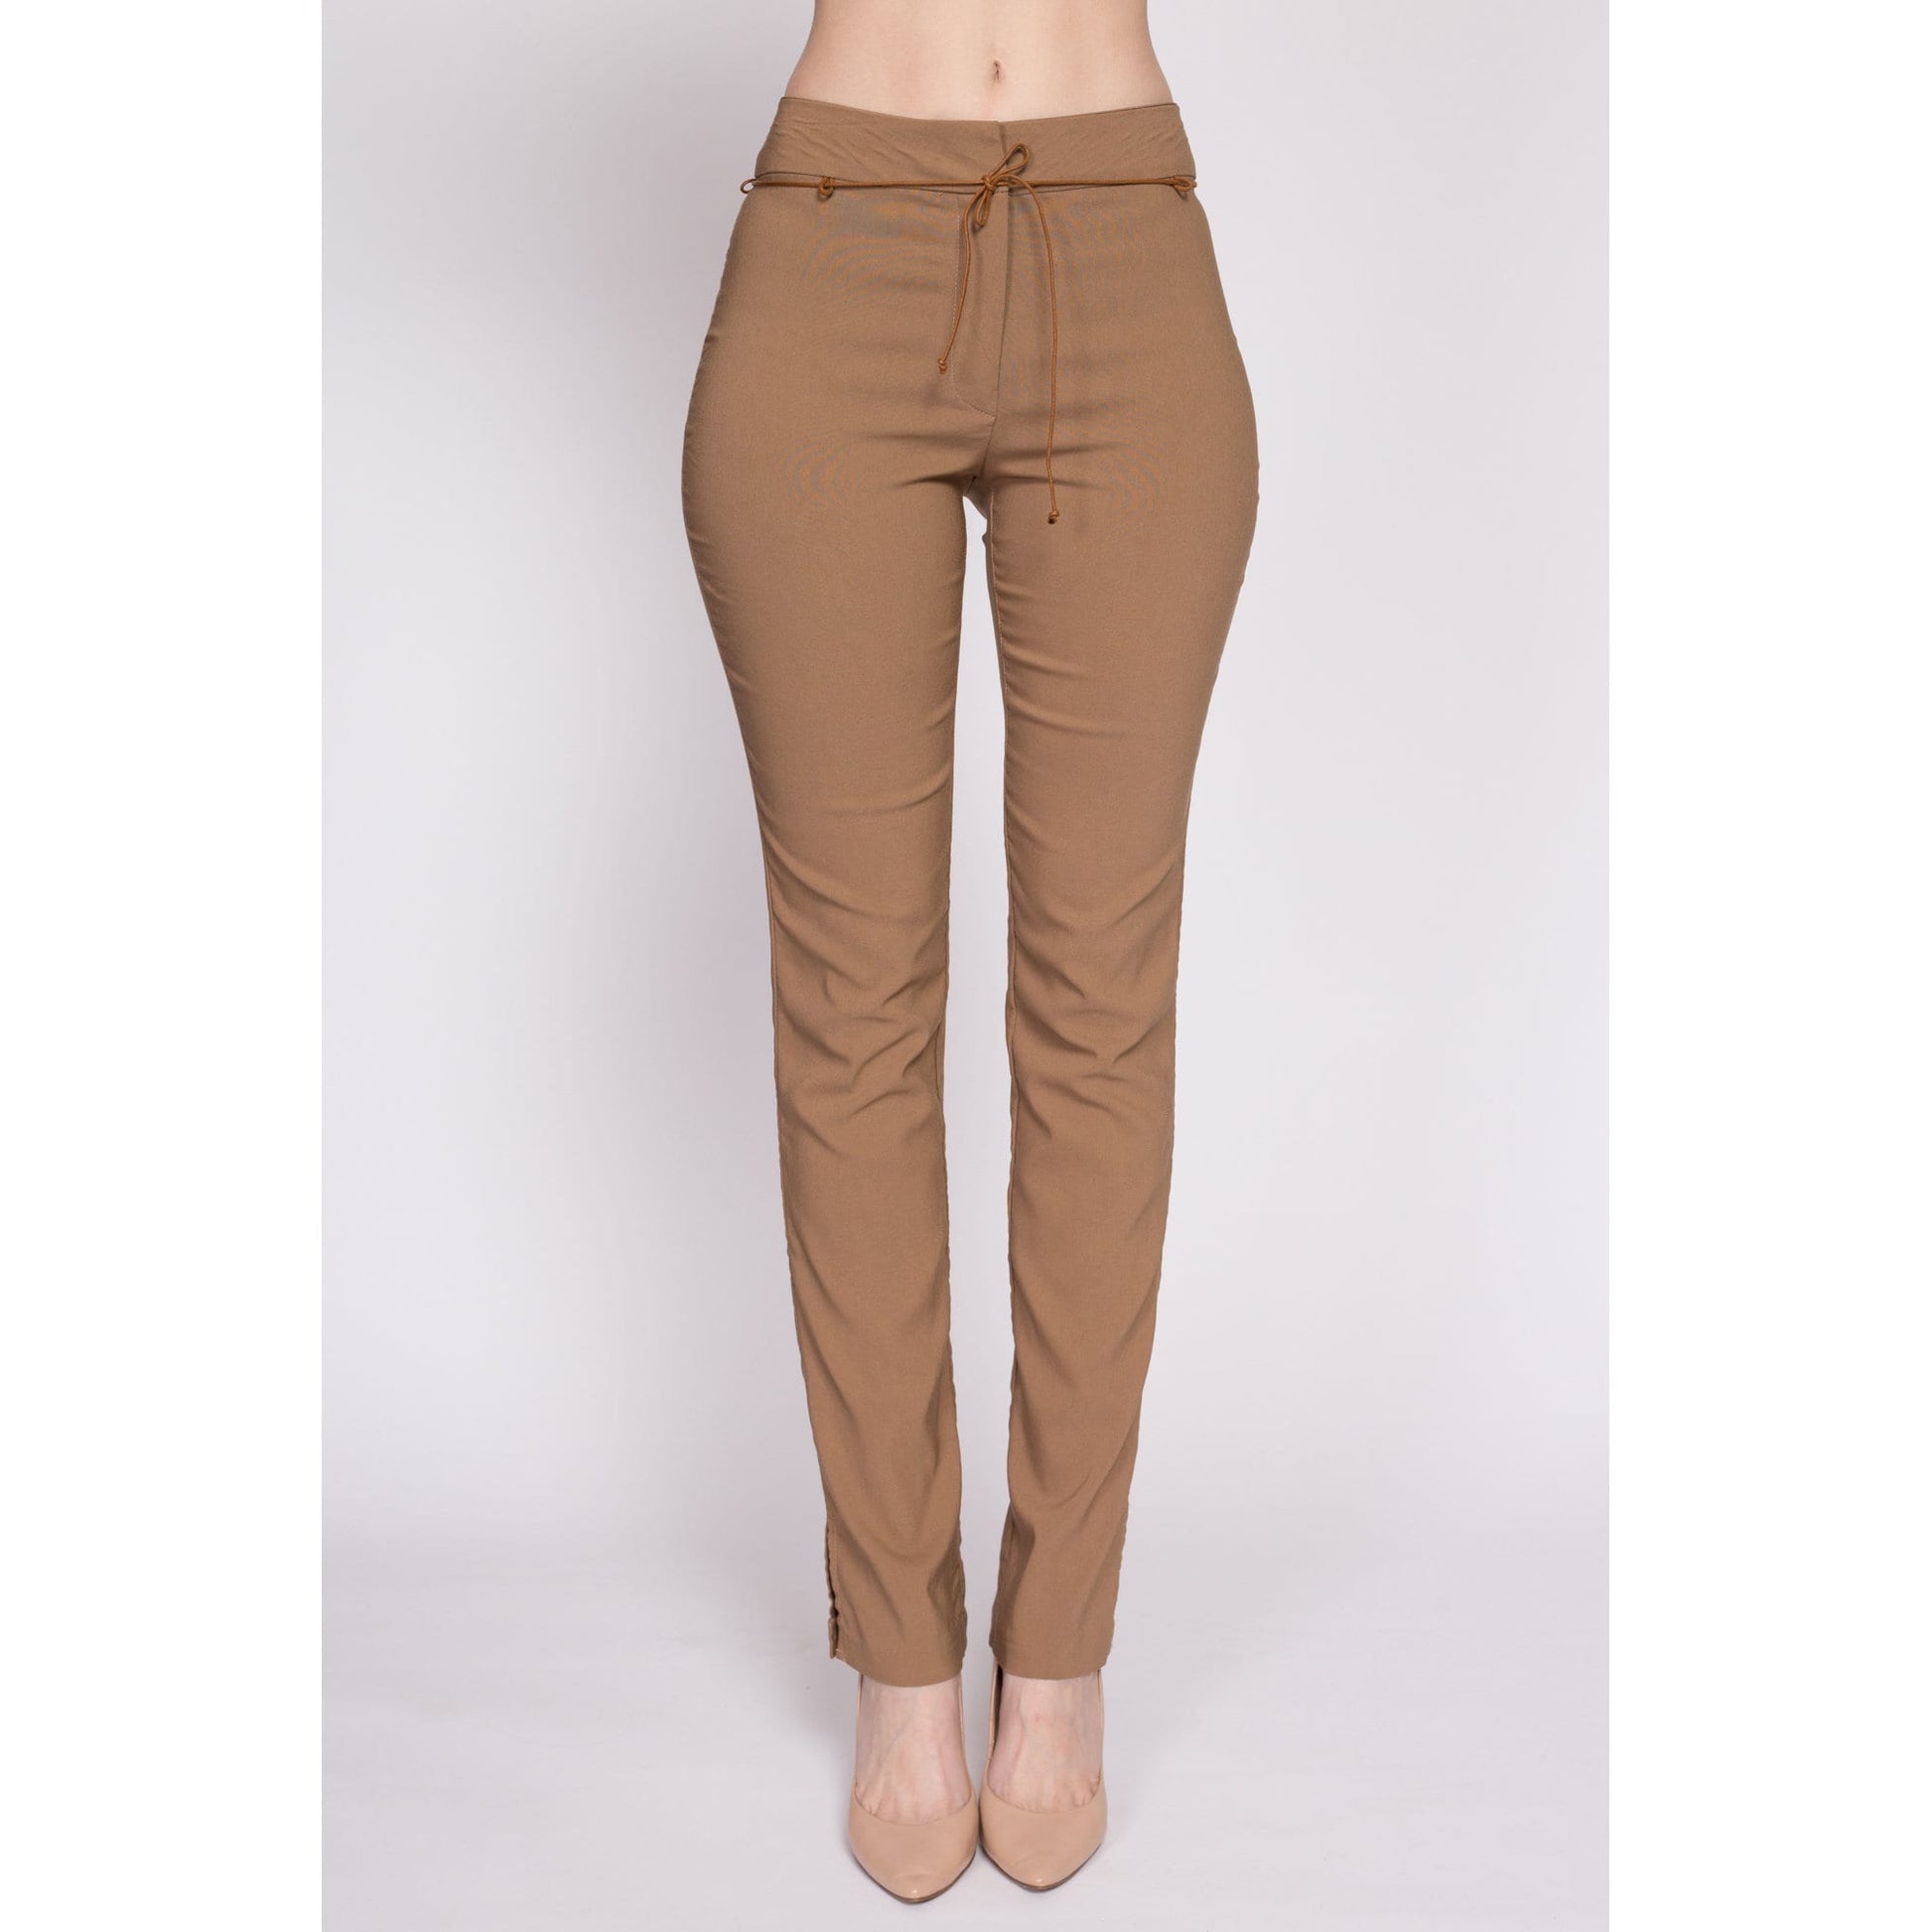 90s Y2K Mid Rise Slim Belted Pants - Extra Small | Vintage Split Leg Tan Stretchy Trousers